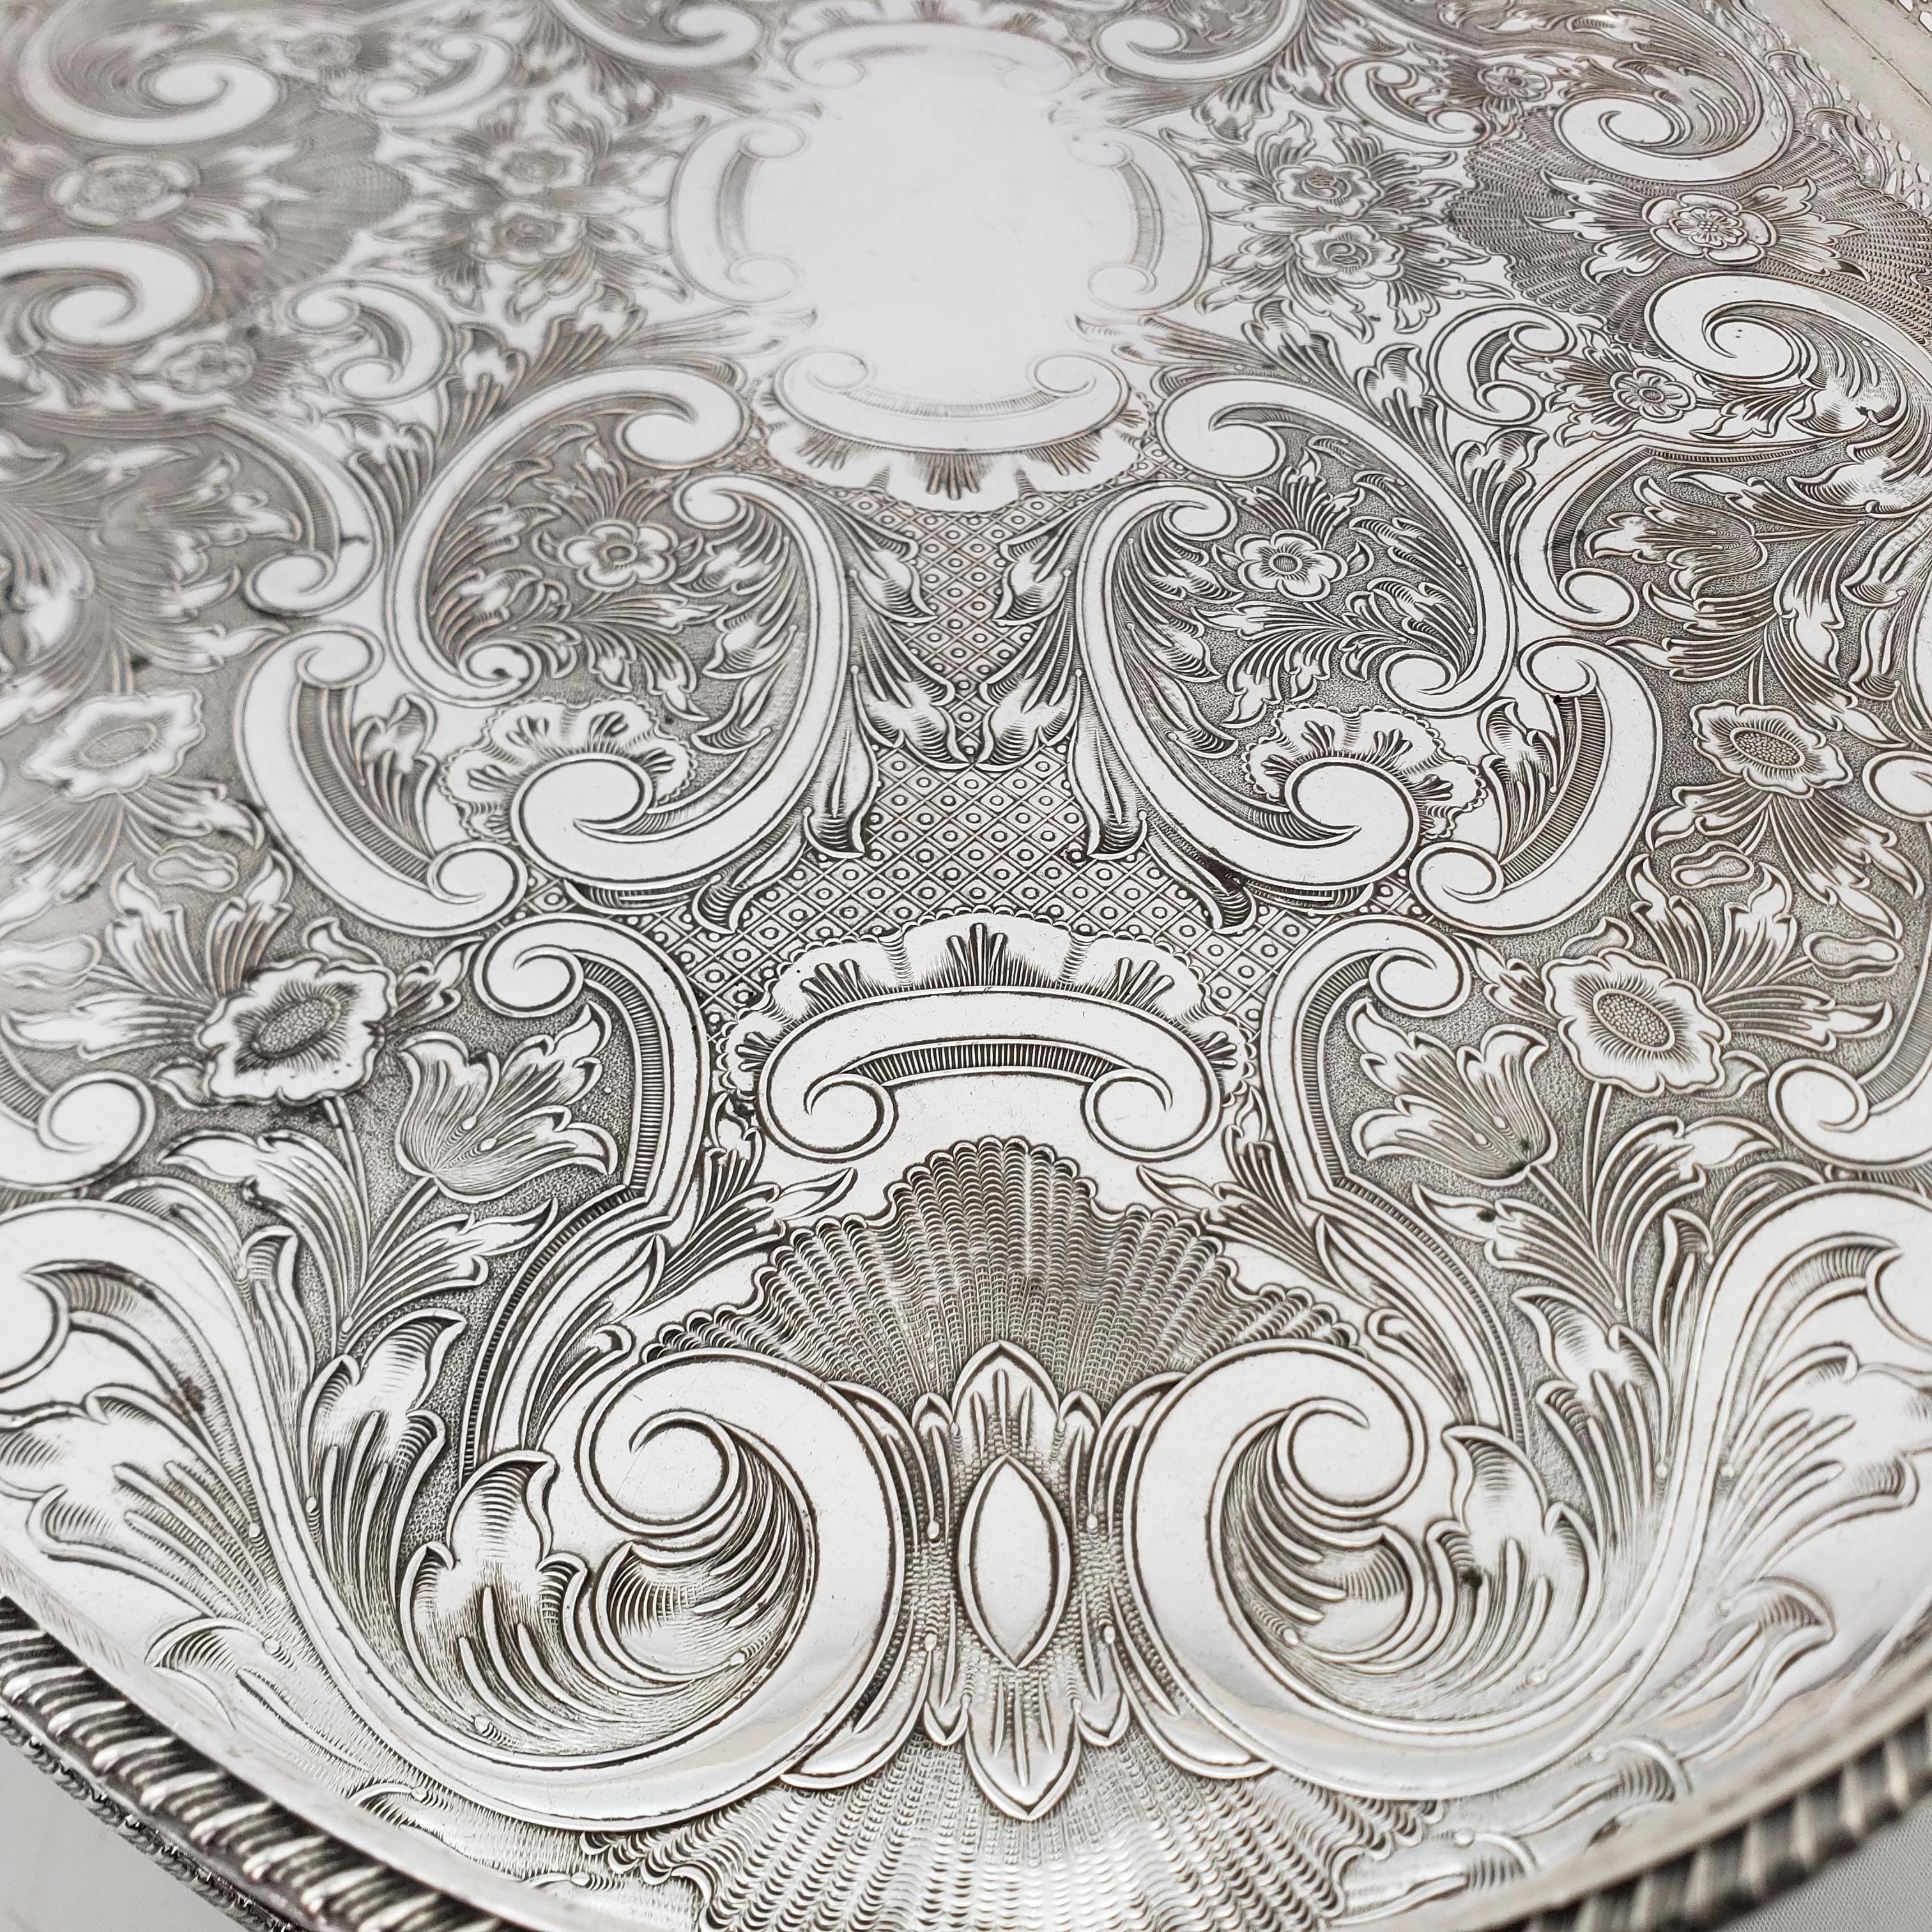 Antique Silver Plated Footed Gallery Serving Tray with Ornate Floral Engraving 2